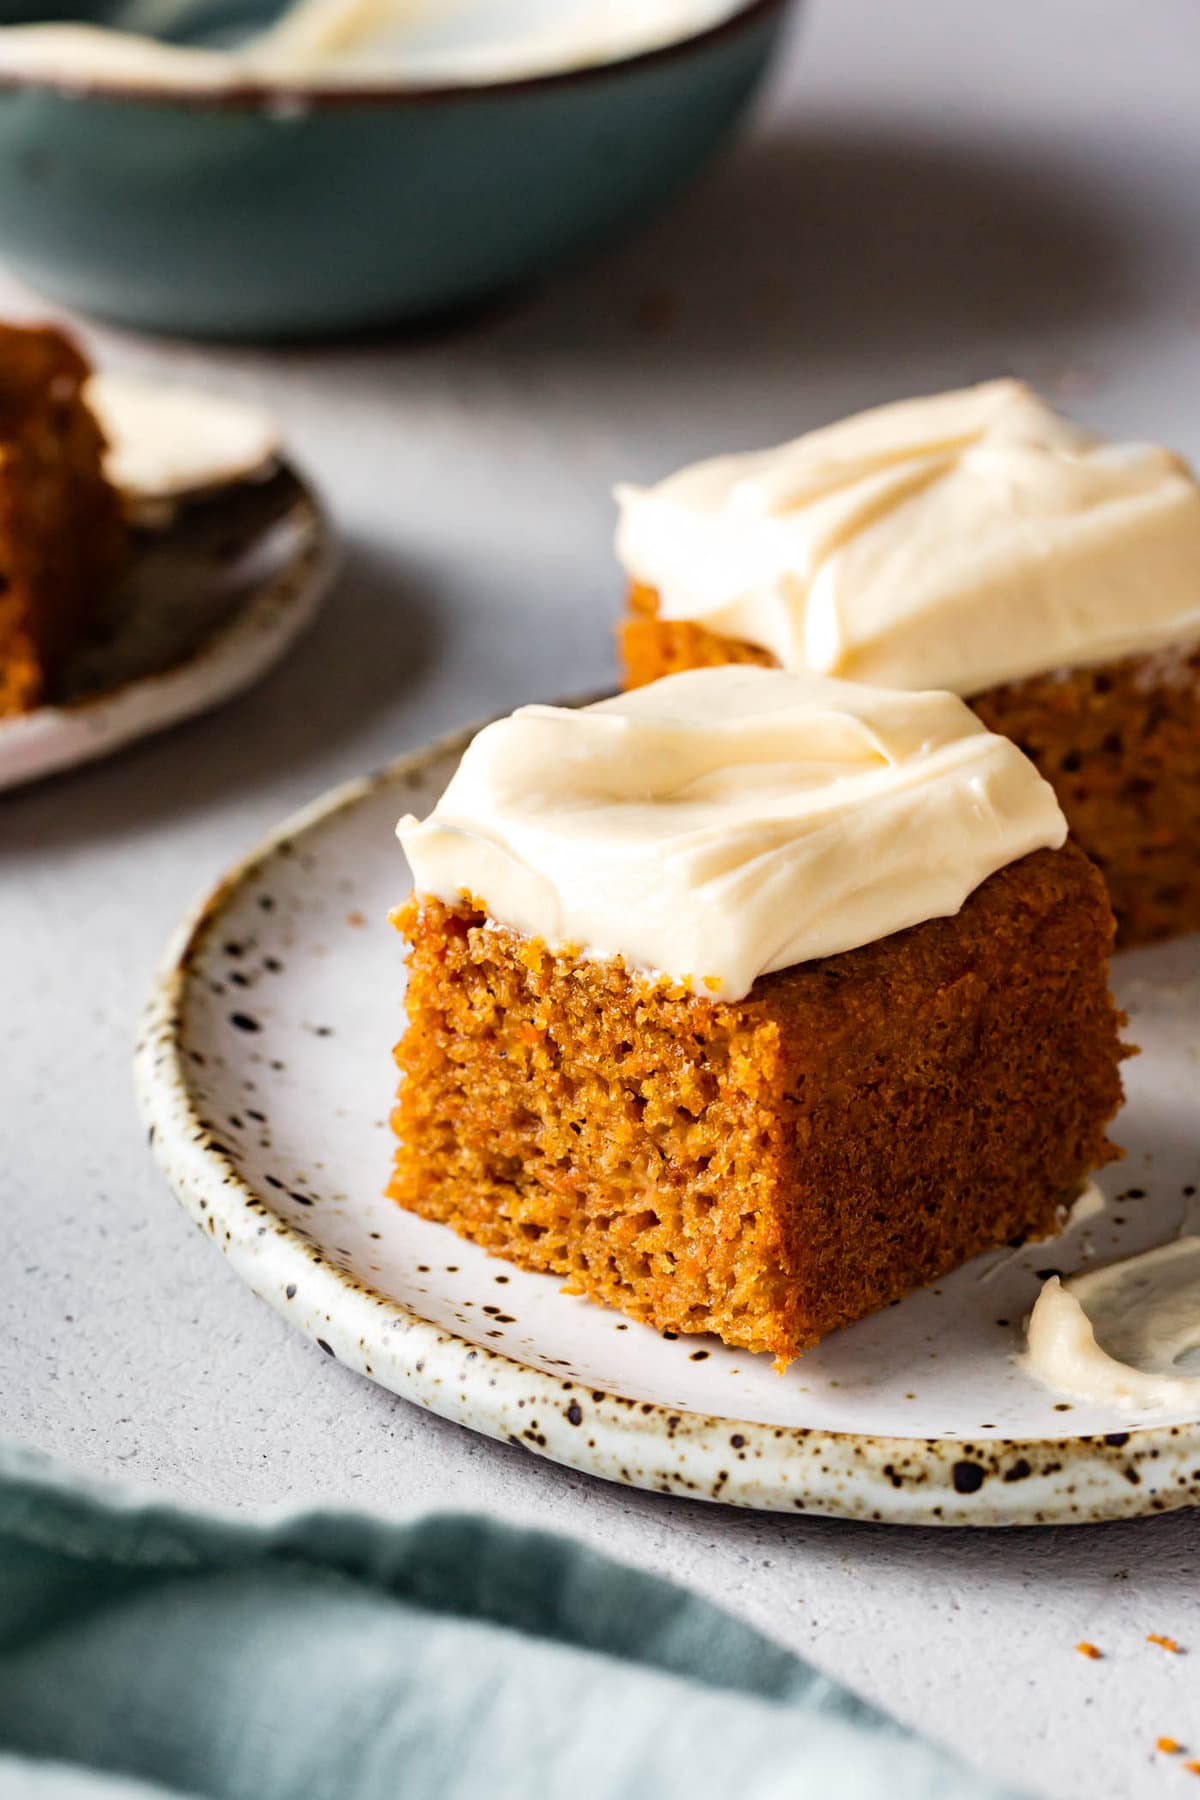 honey cream cheese frosting topped carrot cake slices are on a plate